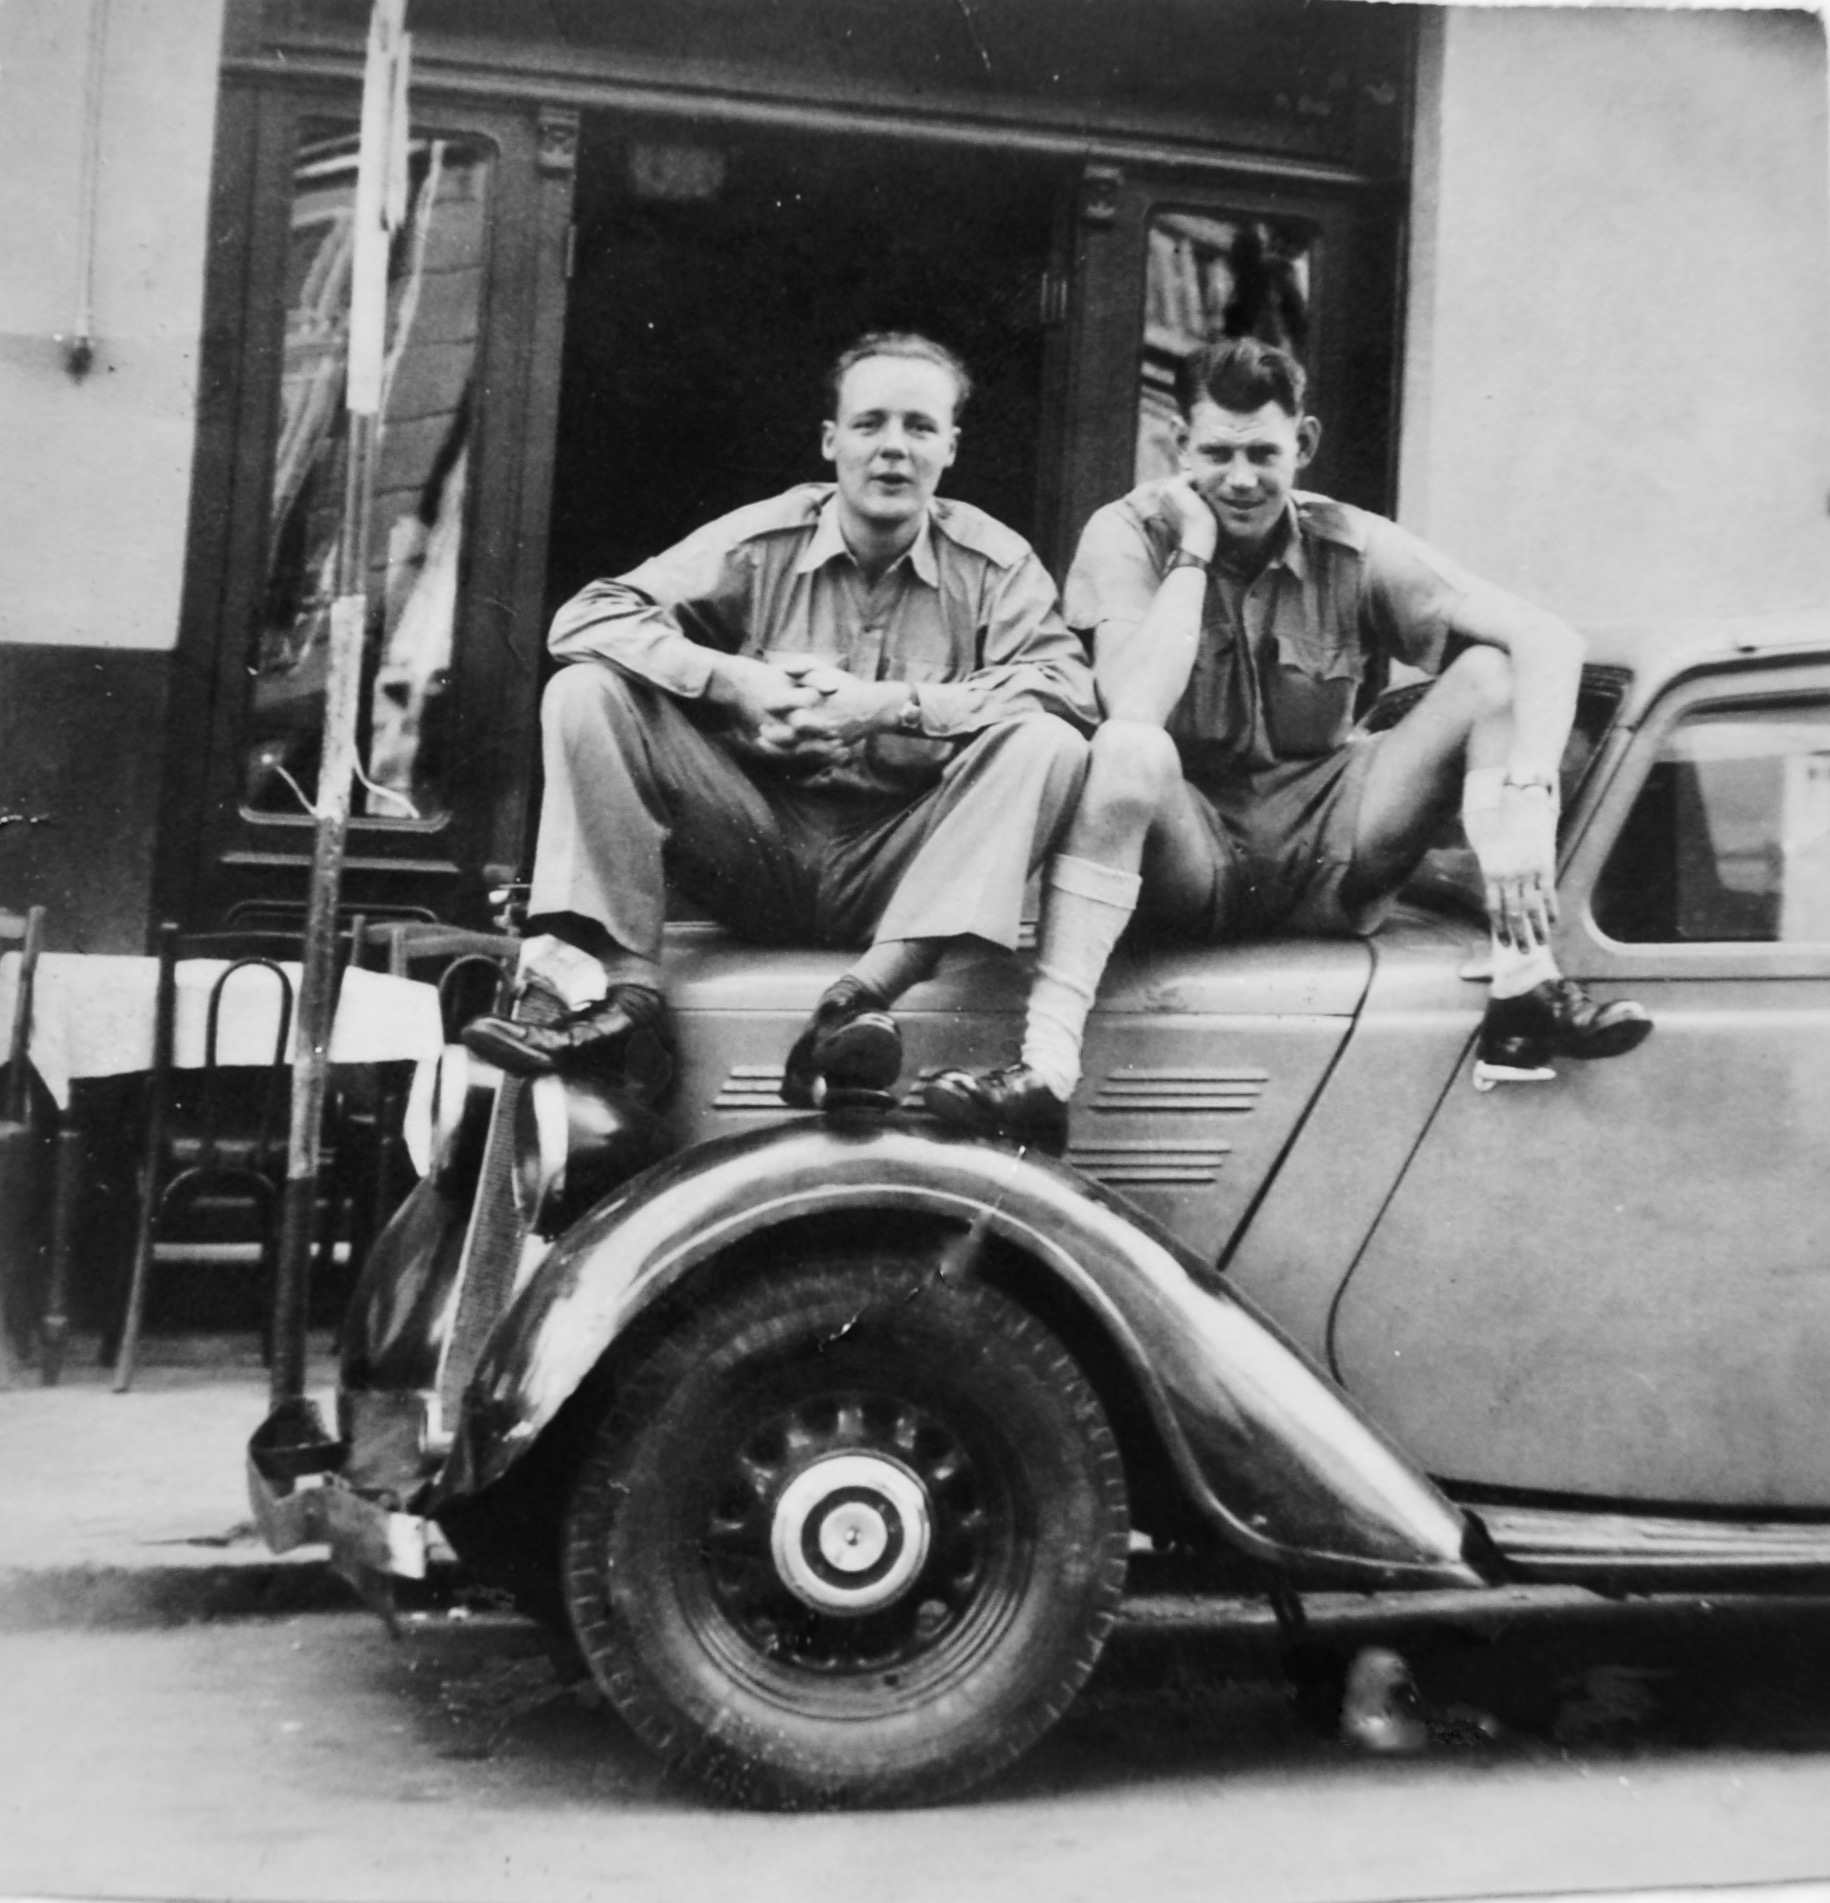 Ron Chapman sitting on car(right). Location-date unknown.